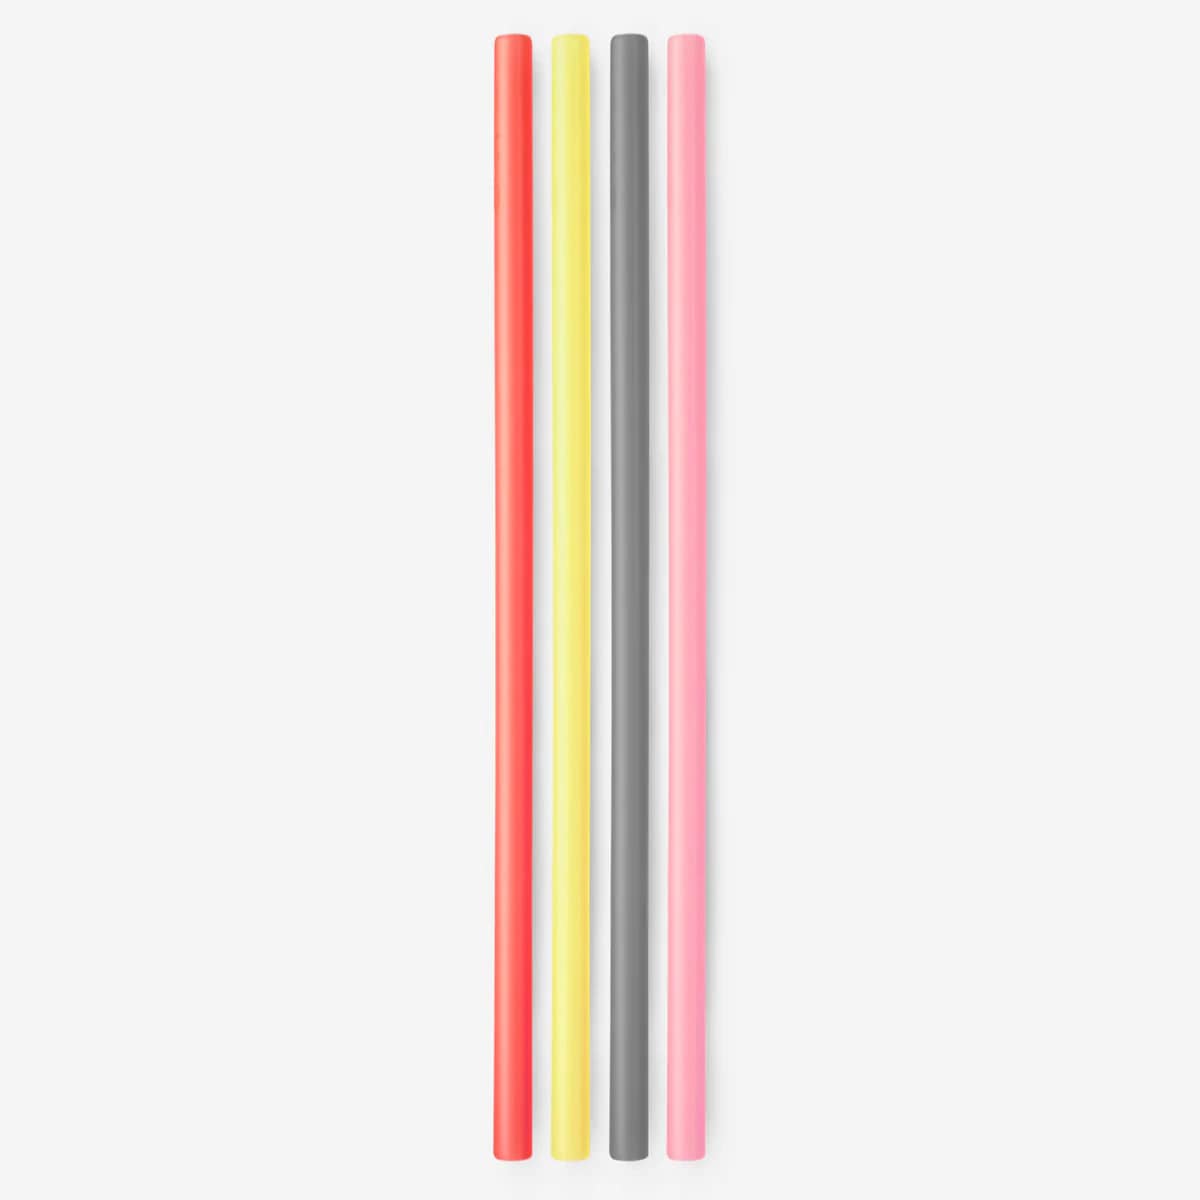 http://www.liltulips.com/cdn/shop/files/x-long-reusable-silicone-straws-pink-yellow-gray-red-4pk-silikids-lil-tulips-30921202237558.webp?v=1698284456